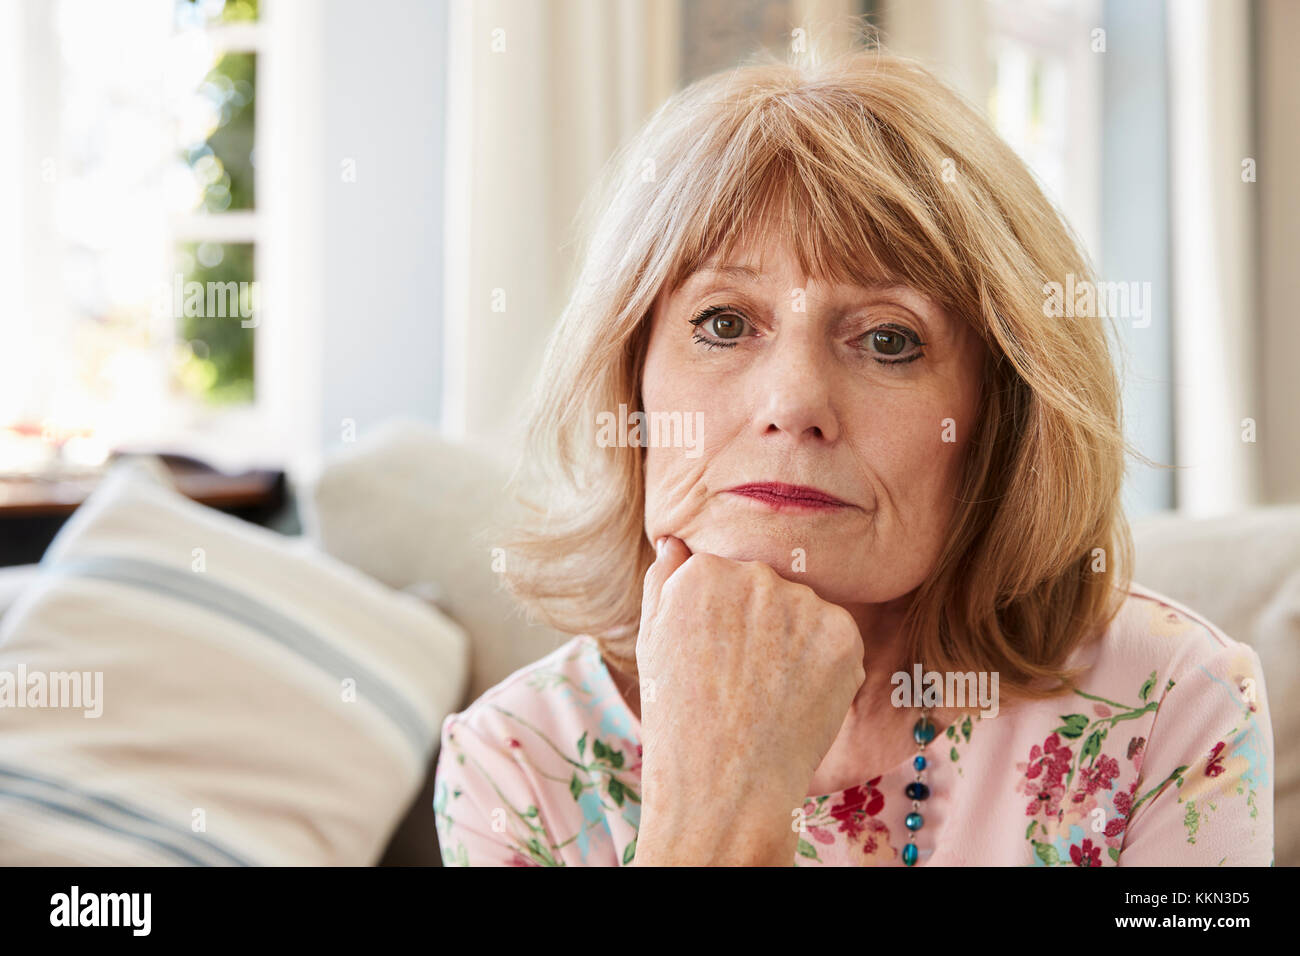 Portrait Of Senior Woman On Sofa Suffering From Depression Stock Photo